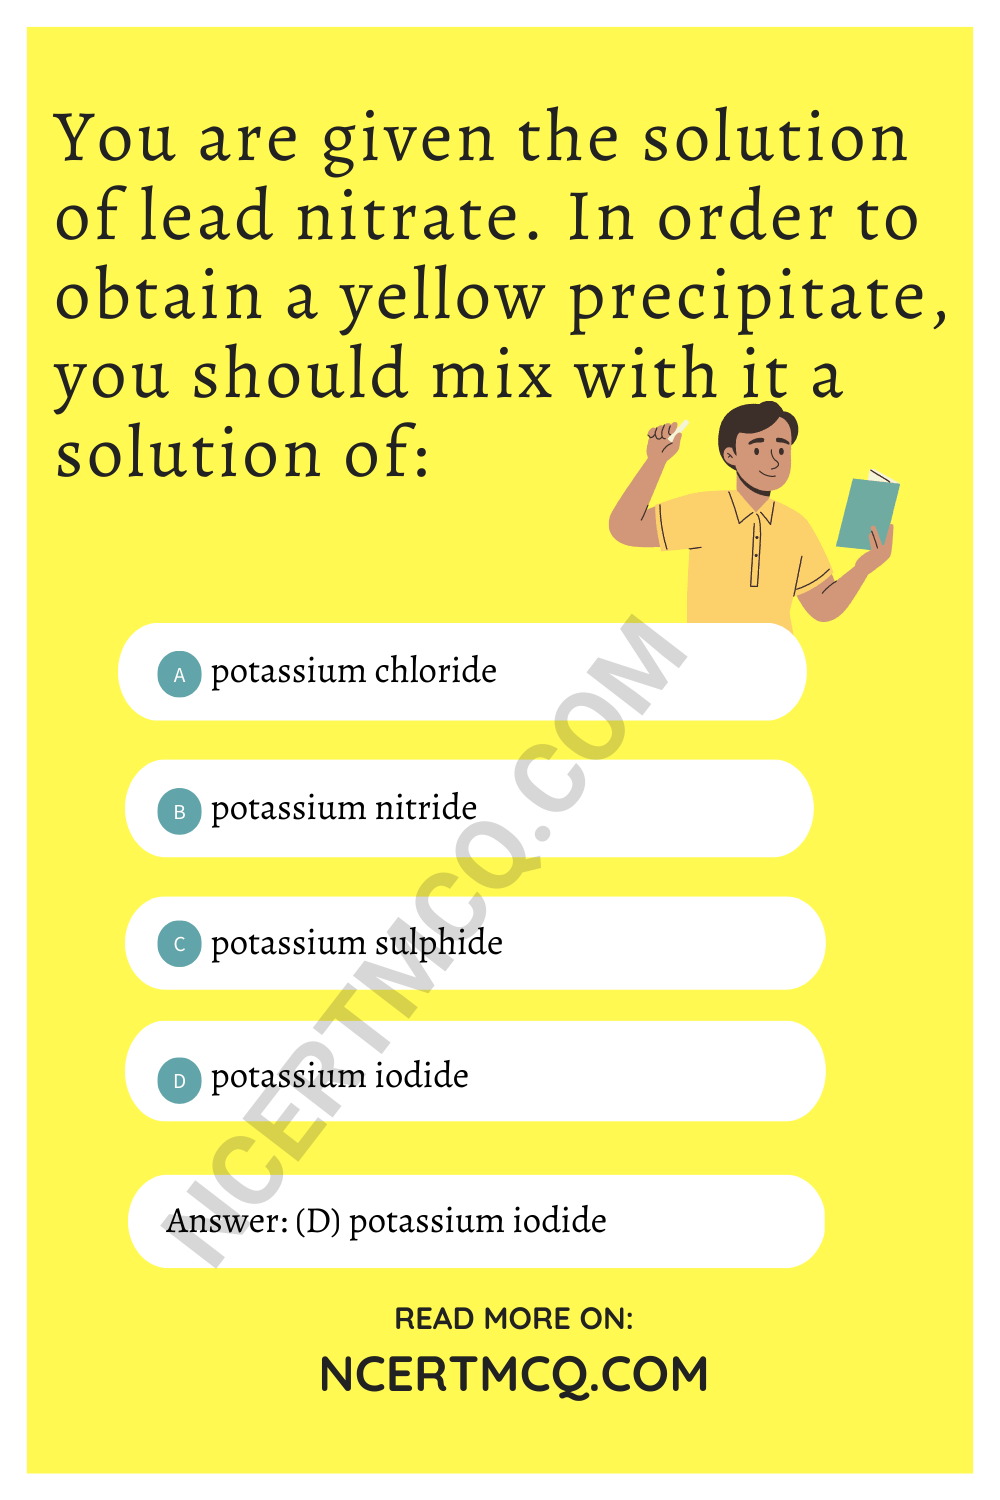 You are given the solution of lead nitrate. In order to obtain a yellow precipitate, you should mix with it a solution of: